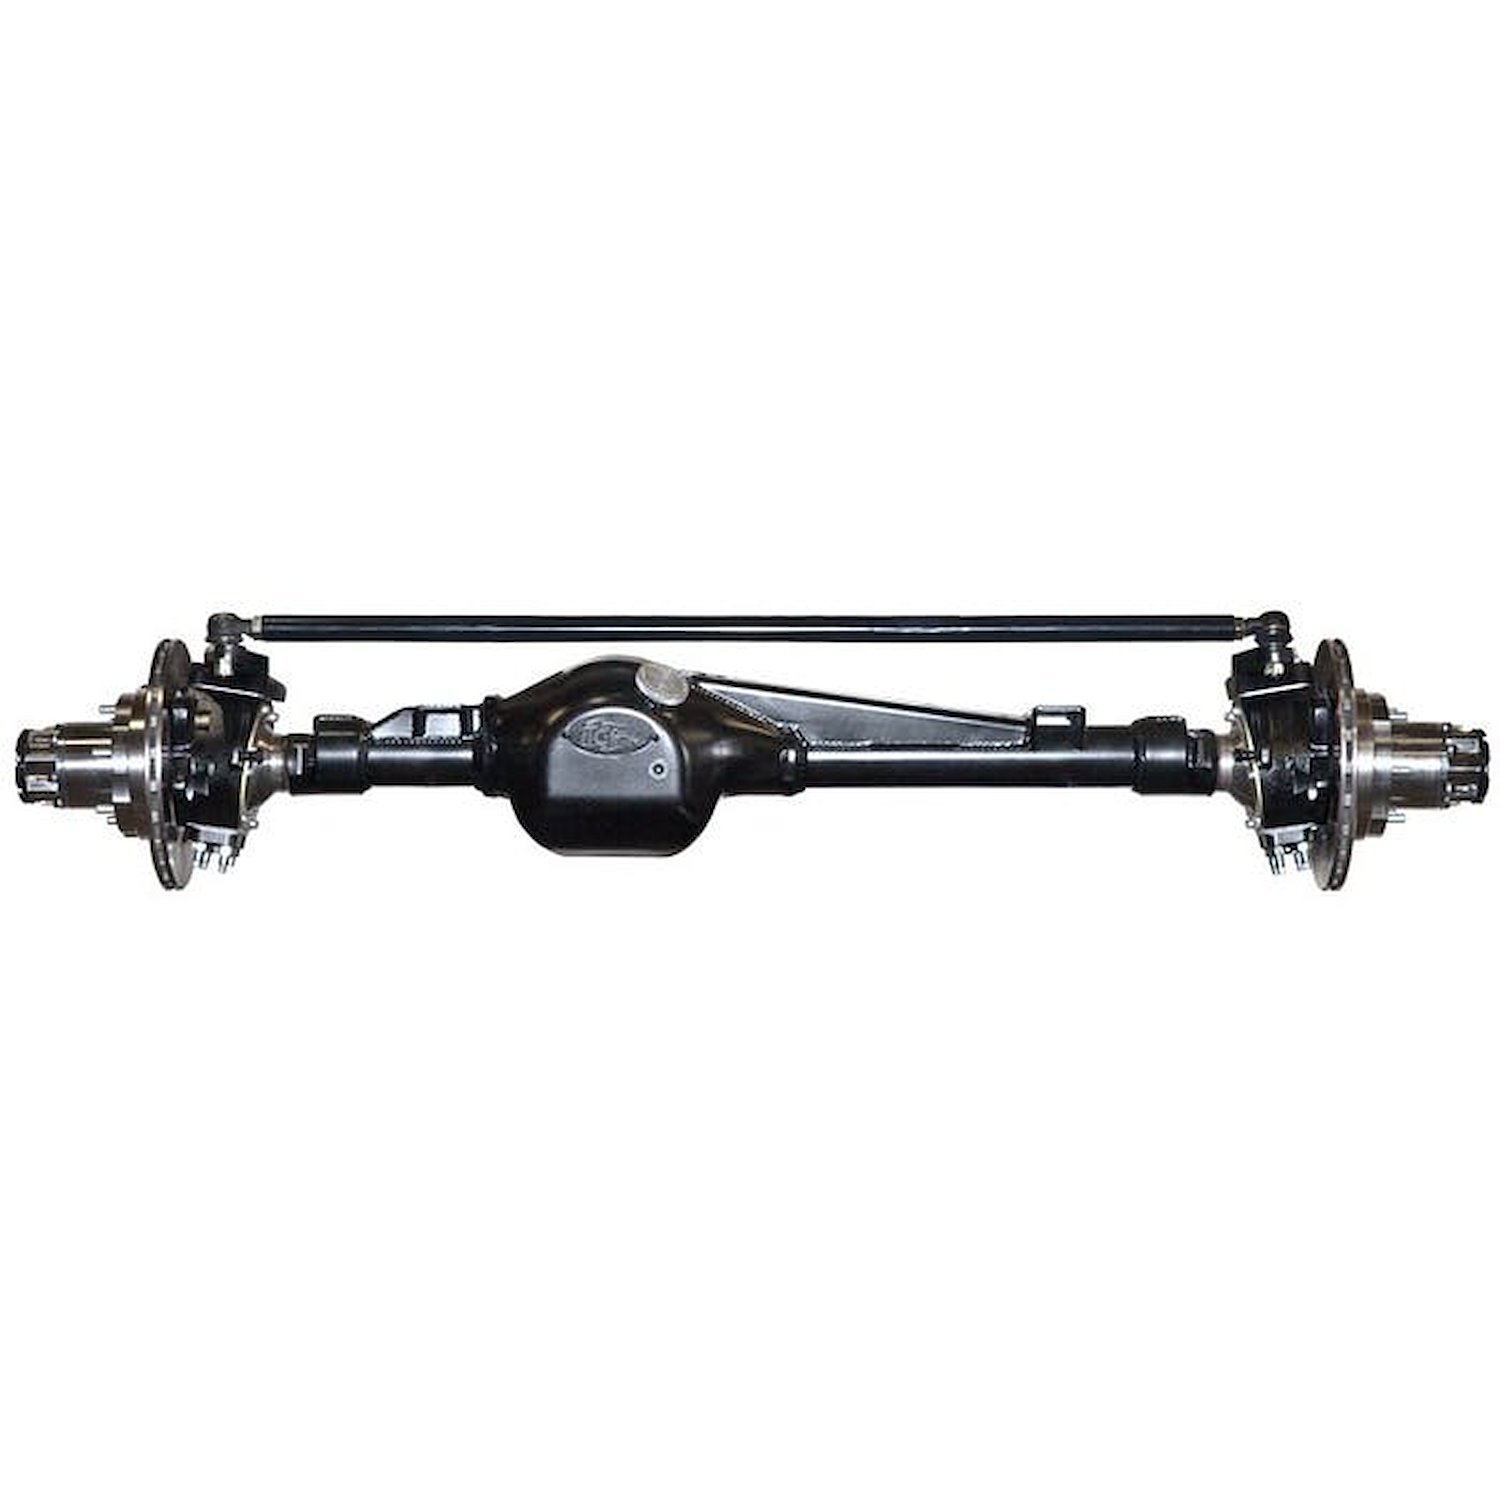 301649-1-KIT Rock Assault Fully-Built Front Axles, +5 Width, RHD, V6, 4.88, Grizzly, Locking Hubs, Toyota